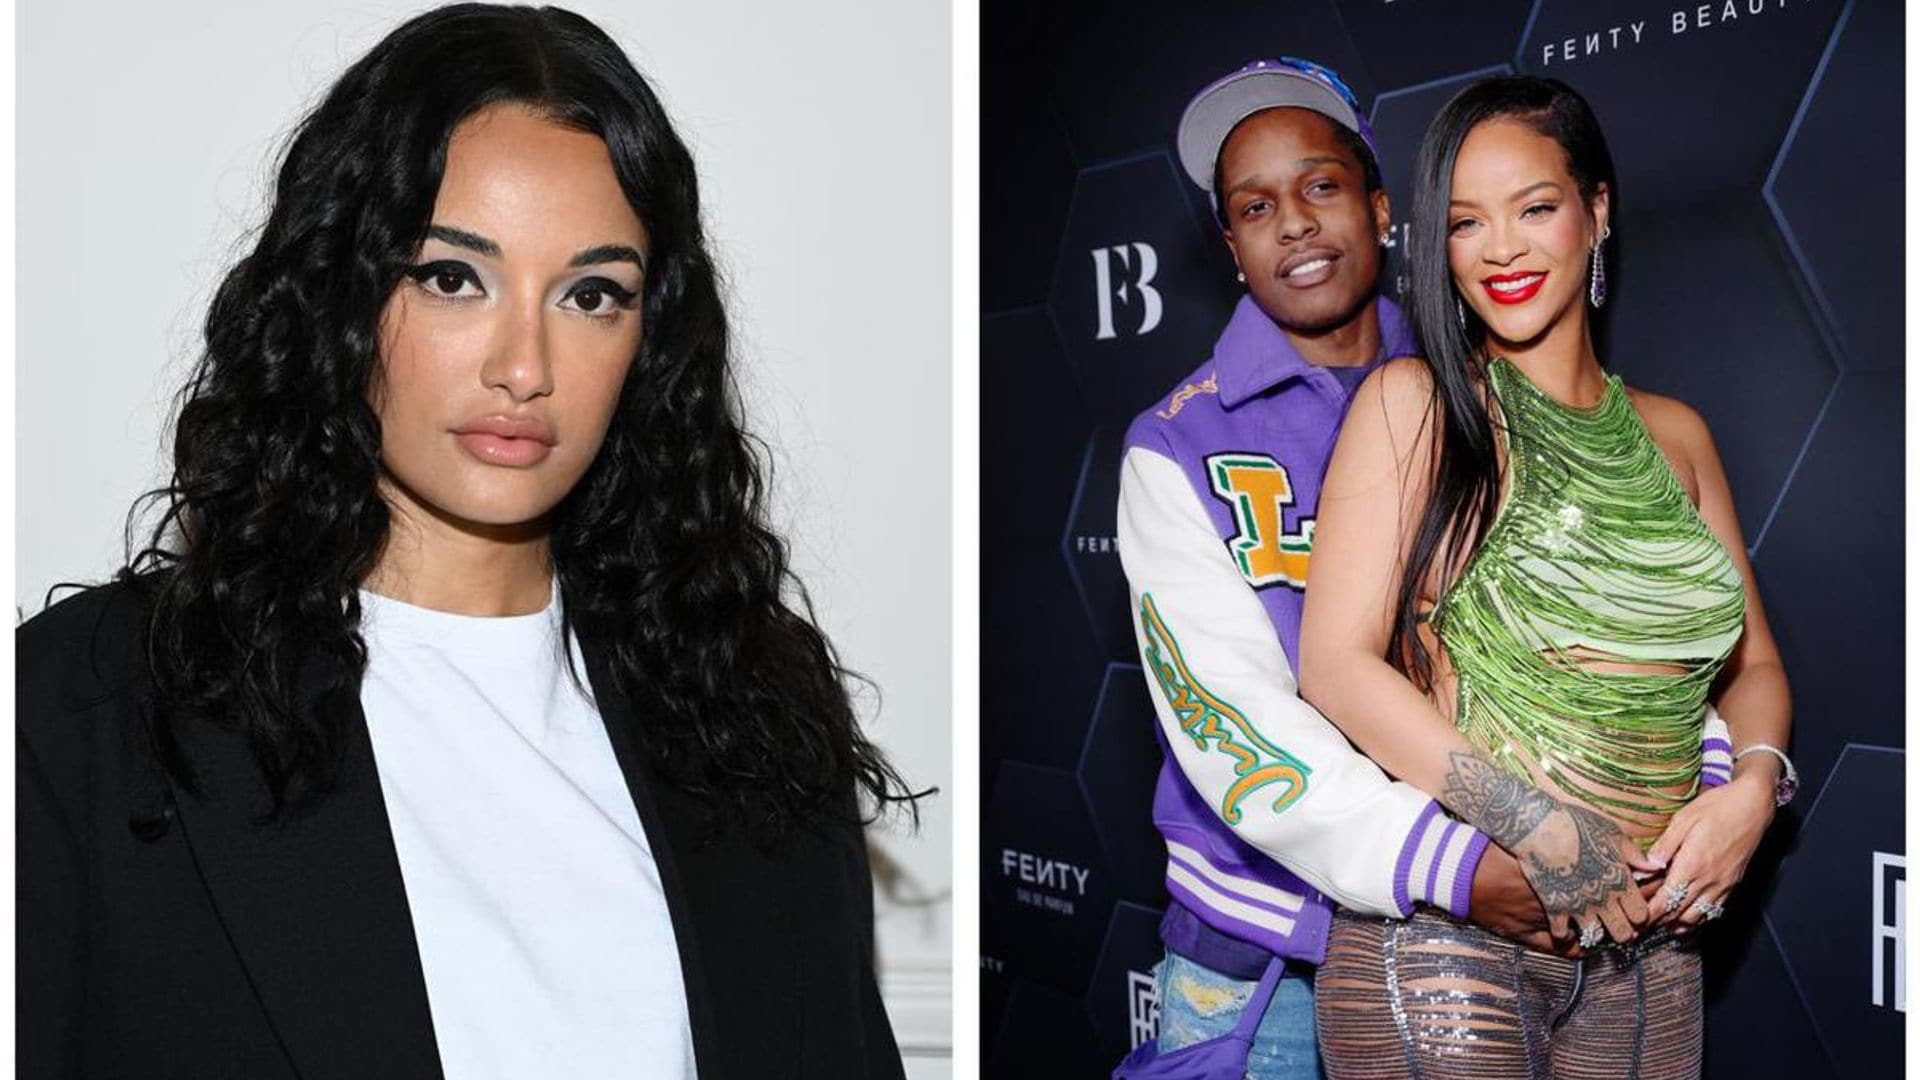 Amina Muaddi responds to her involvement in Rihanna and A$AP Rocky cheating rumors